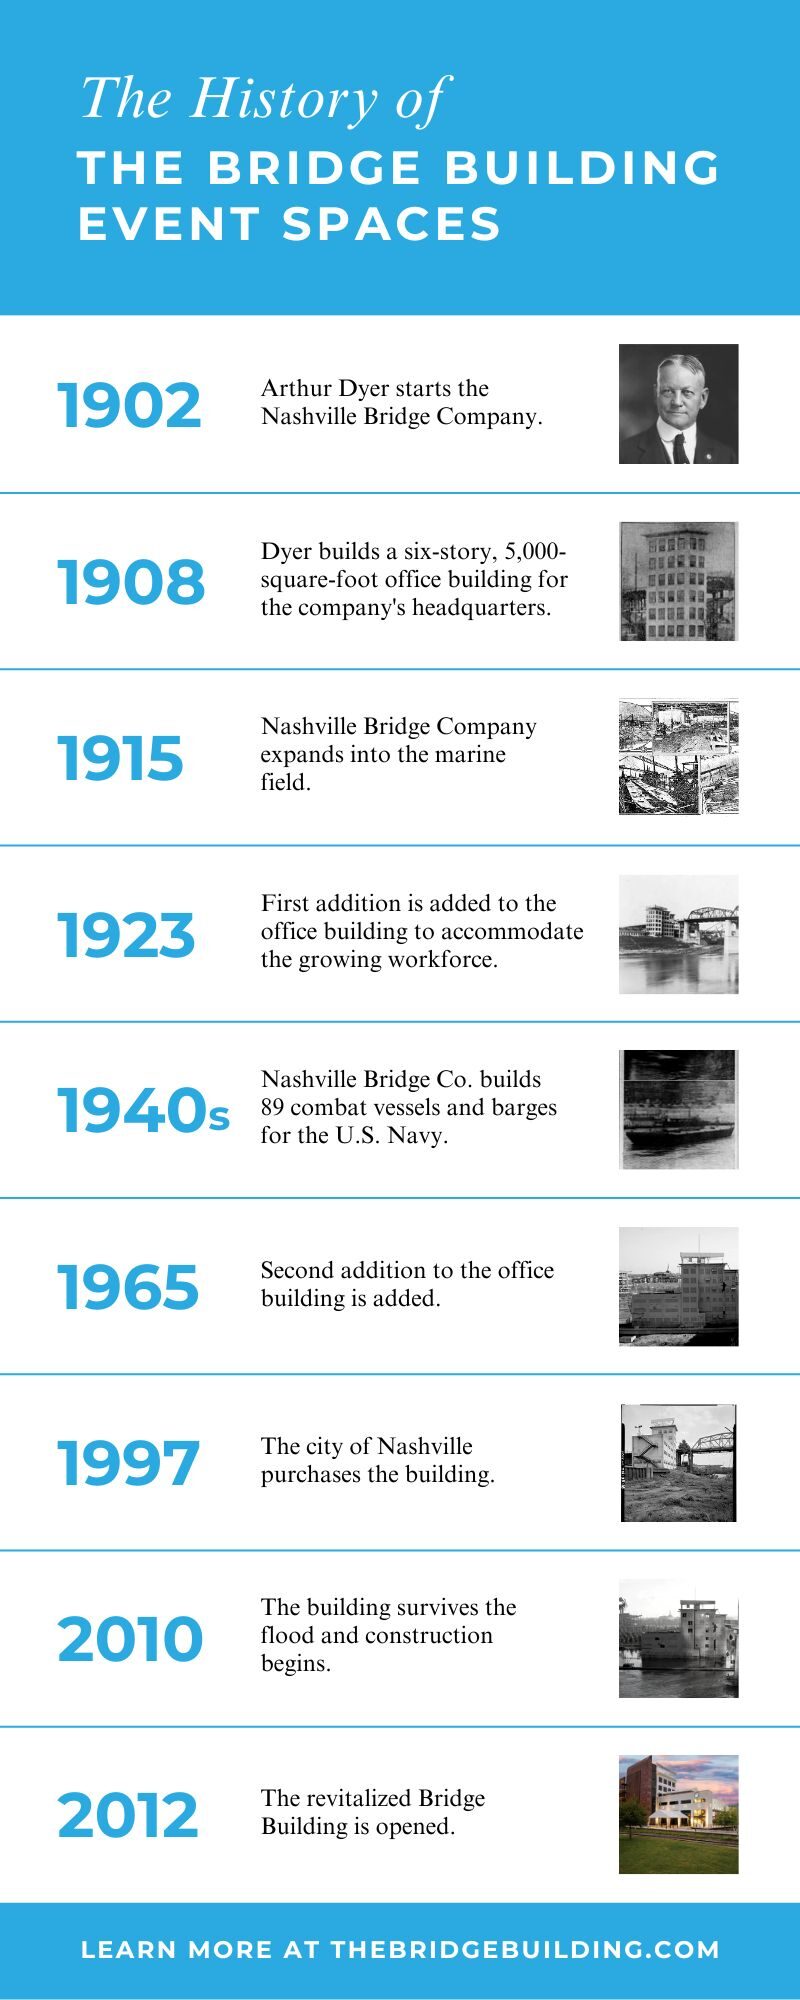 Timeline of the history of the Bridge Building Event Spaces, premier downtown Nashville wedding and event venue